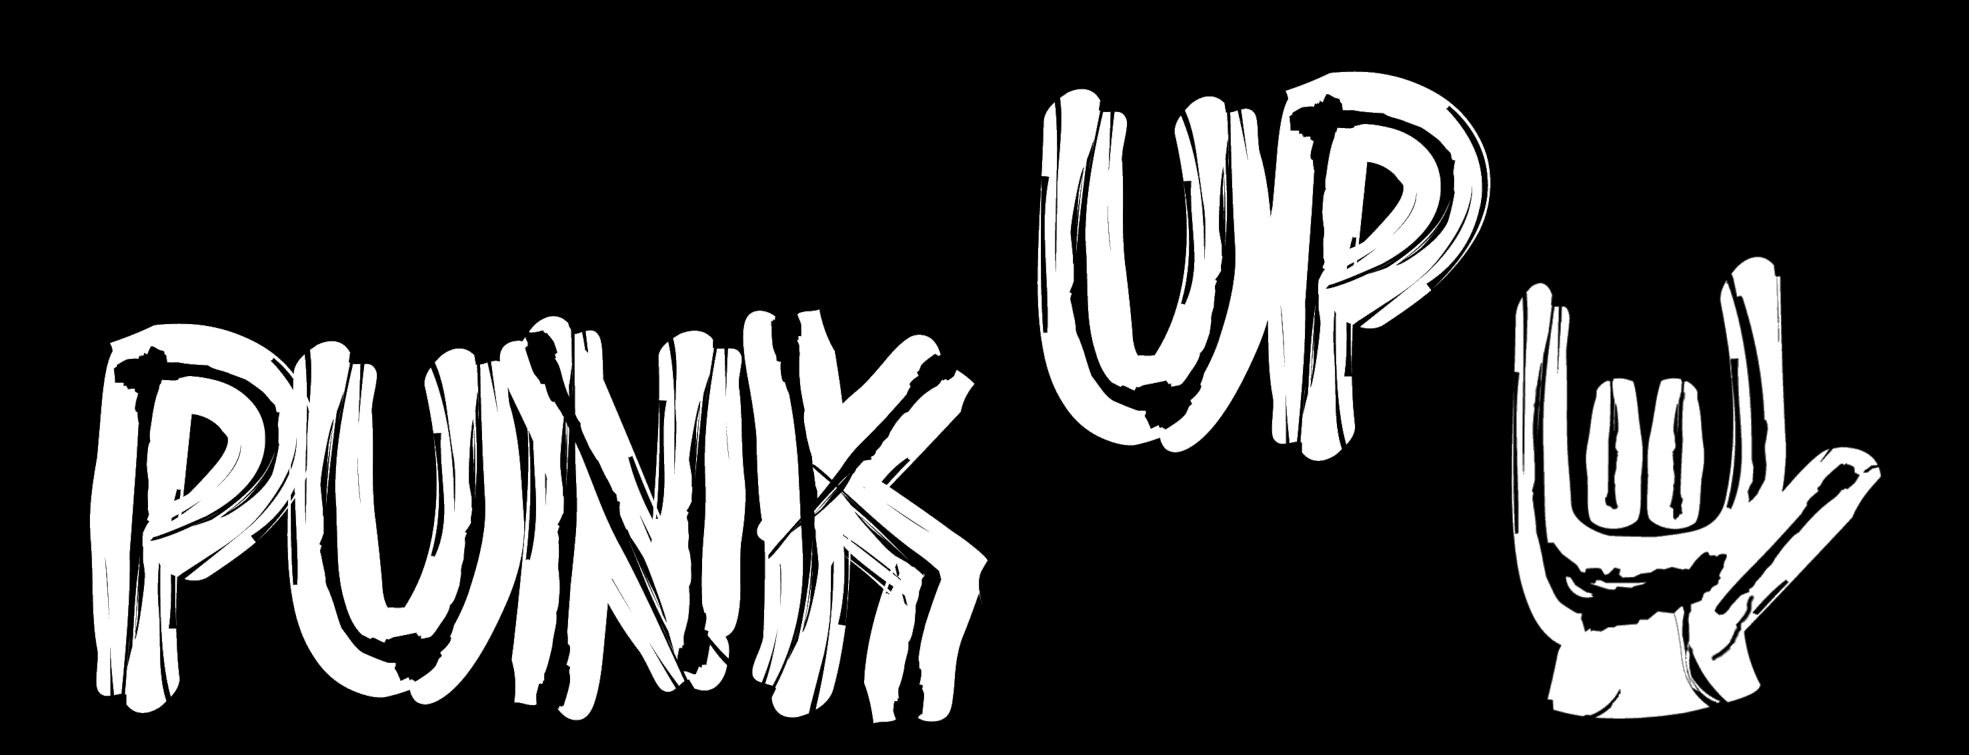 punkup your inner game